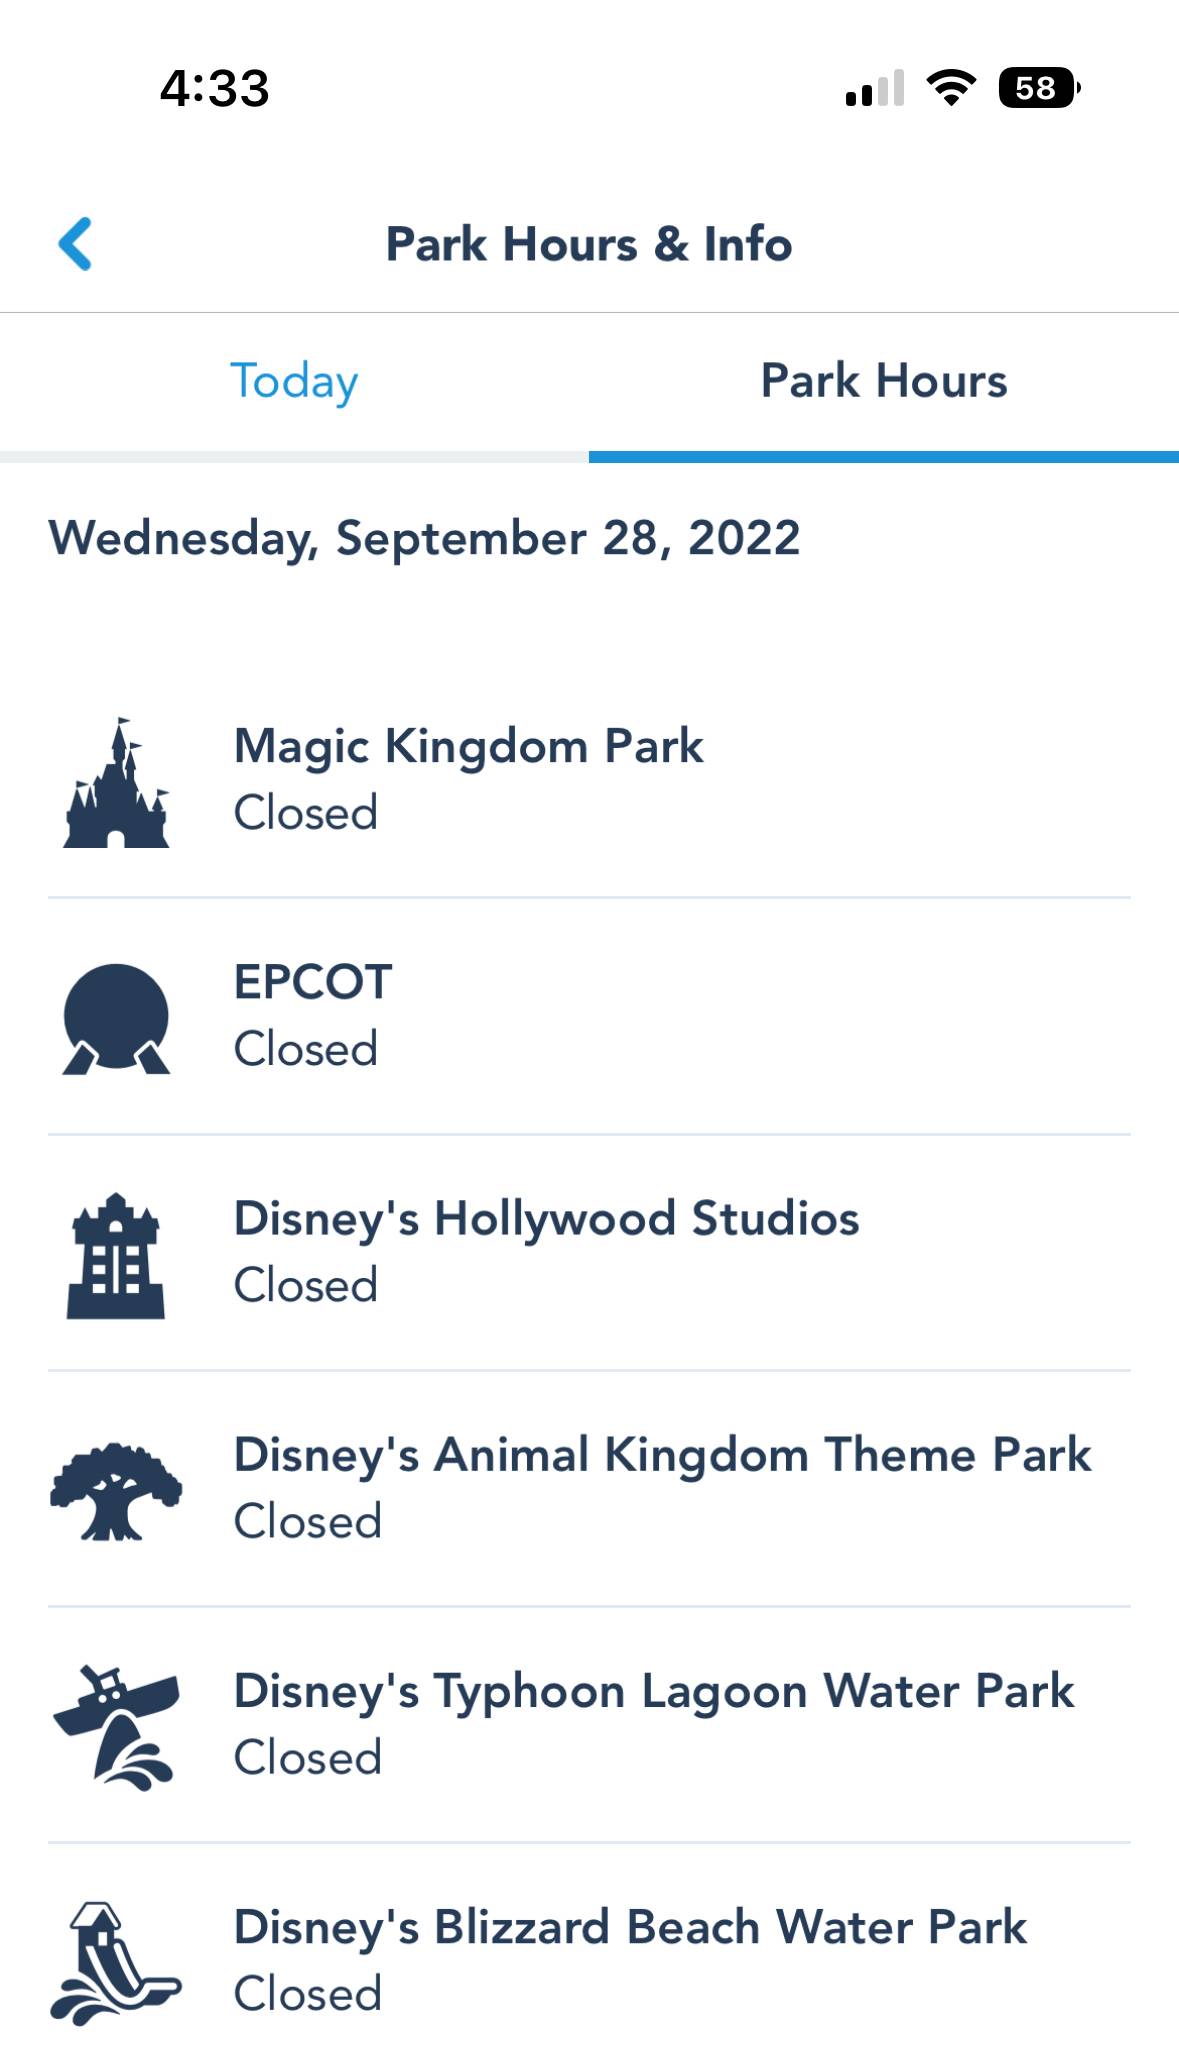 Disney extends multi-day ticket usage window due to Hurricane Ian related theme park closures at Walt Disney World